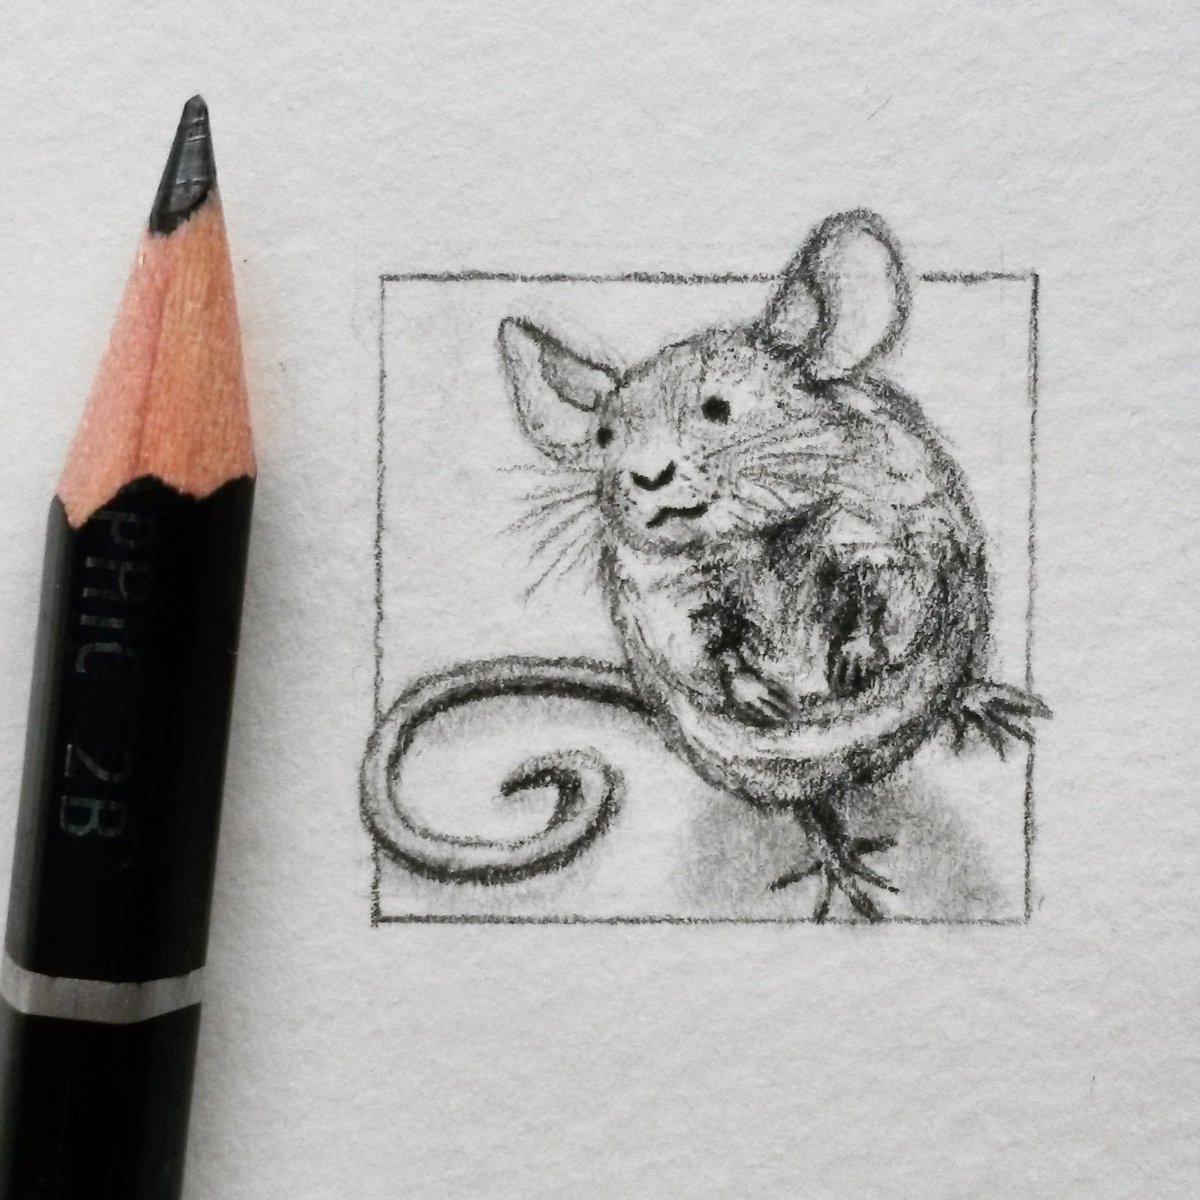 Day 29 is inspired by #FlowersForAlgernon by #DanielKeyes ~ a heartbreaking rumination on the value of intelligence 🐁
@illustrationhq #DrawingADay #JohnVernonLord